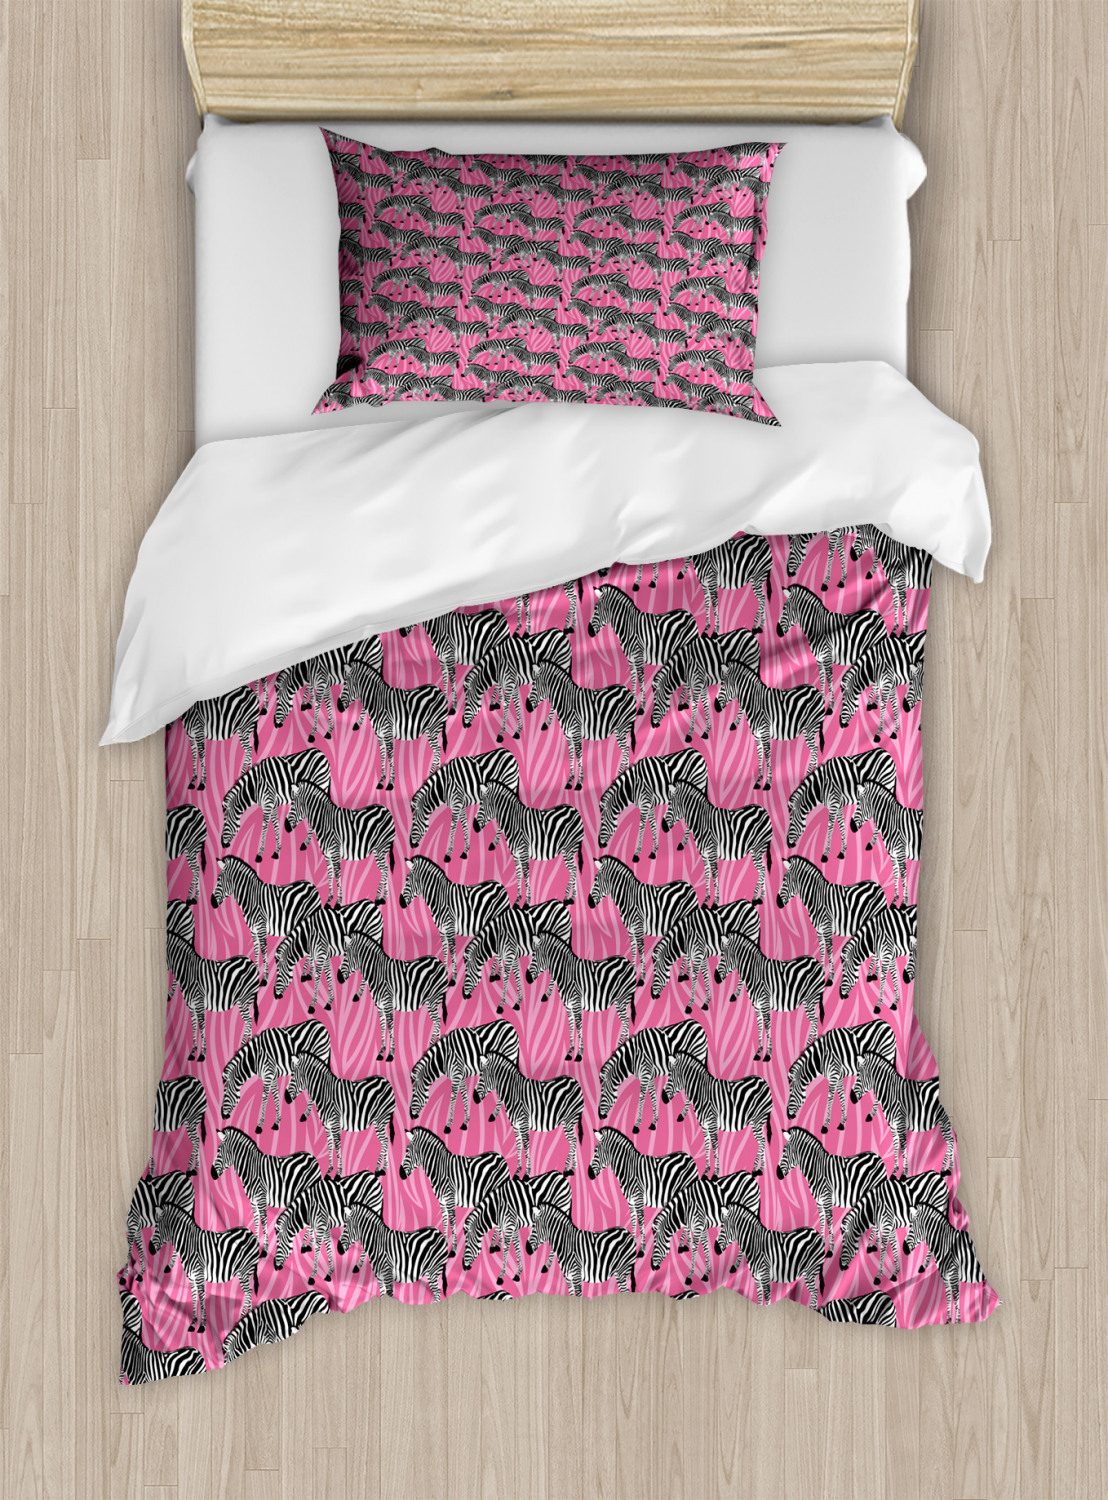 Pink Zebra Duvet Cover Set Twin Queen King Sizes with Pillow Shams ...